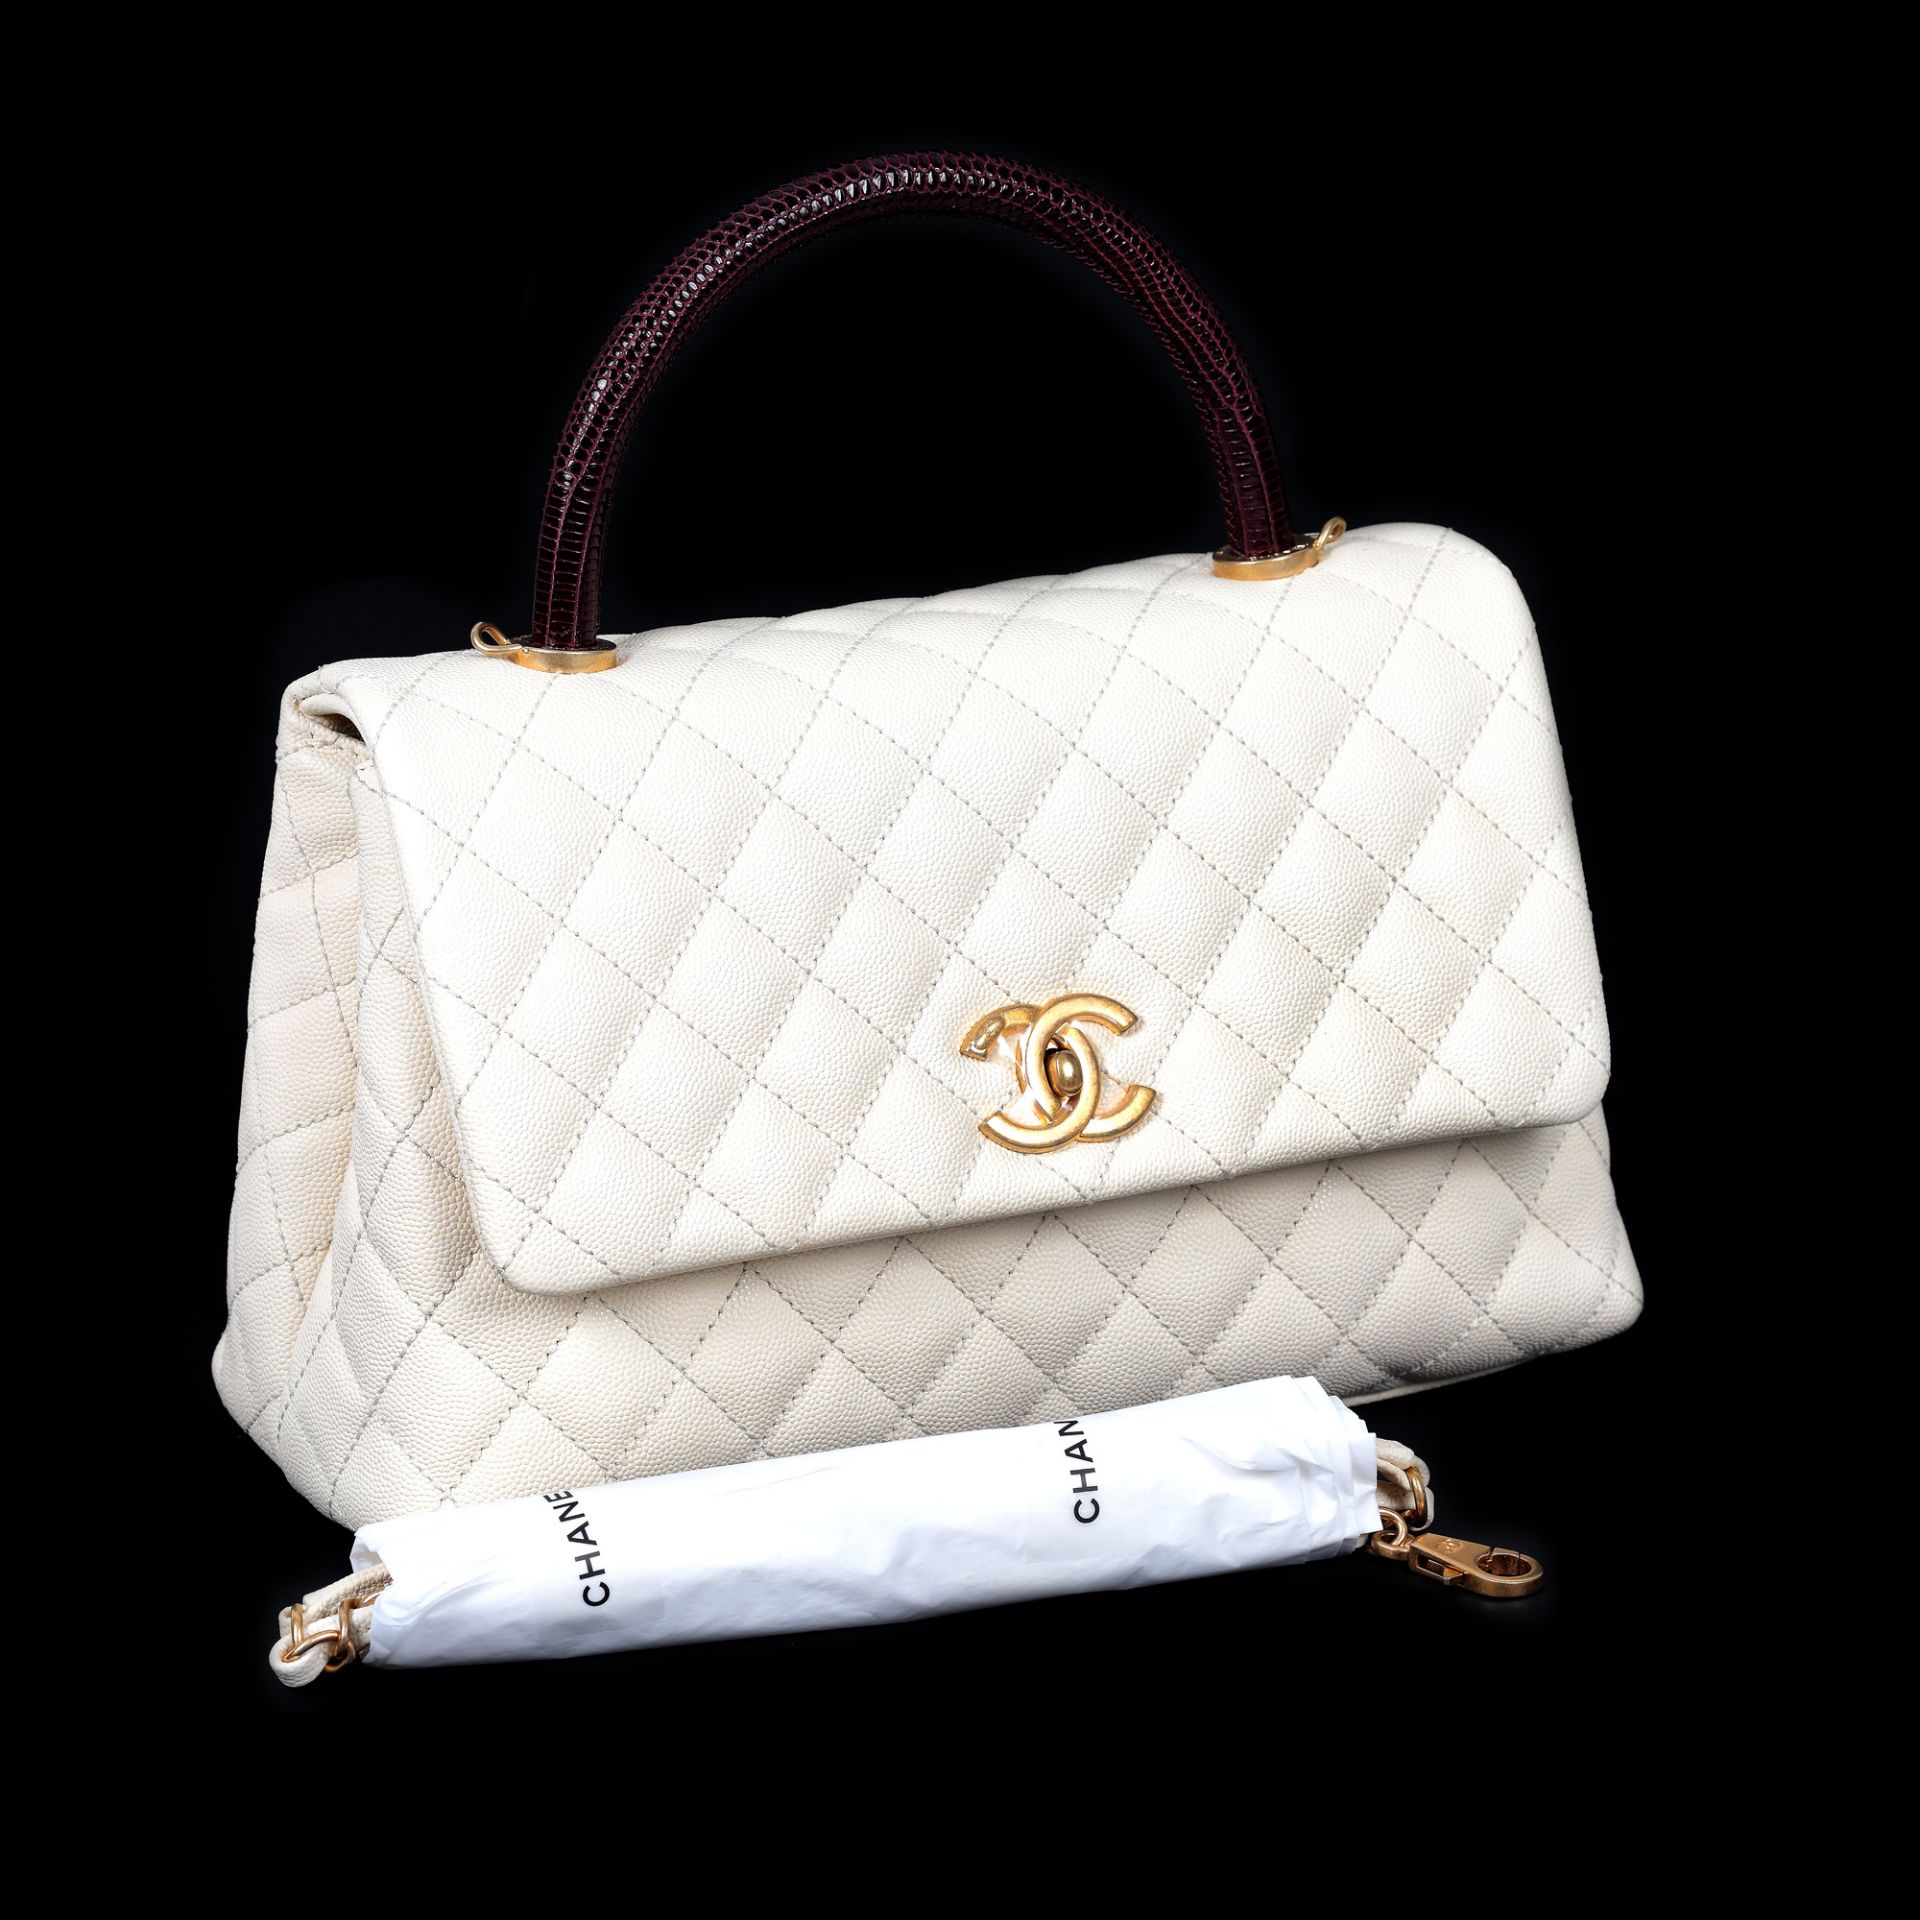 "Coco Handle Bag" - Chanel bag, quilted leather, white, lizard leather handle, burgundy - Image 8 of 11